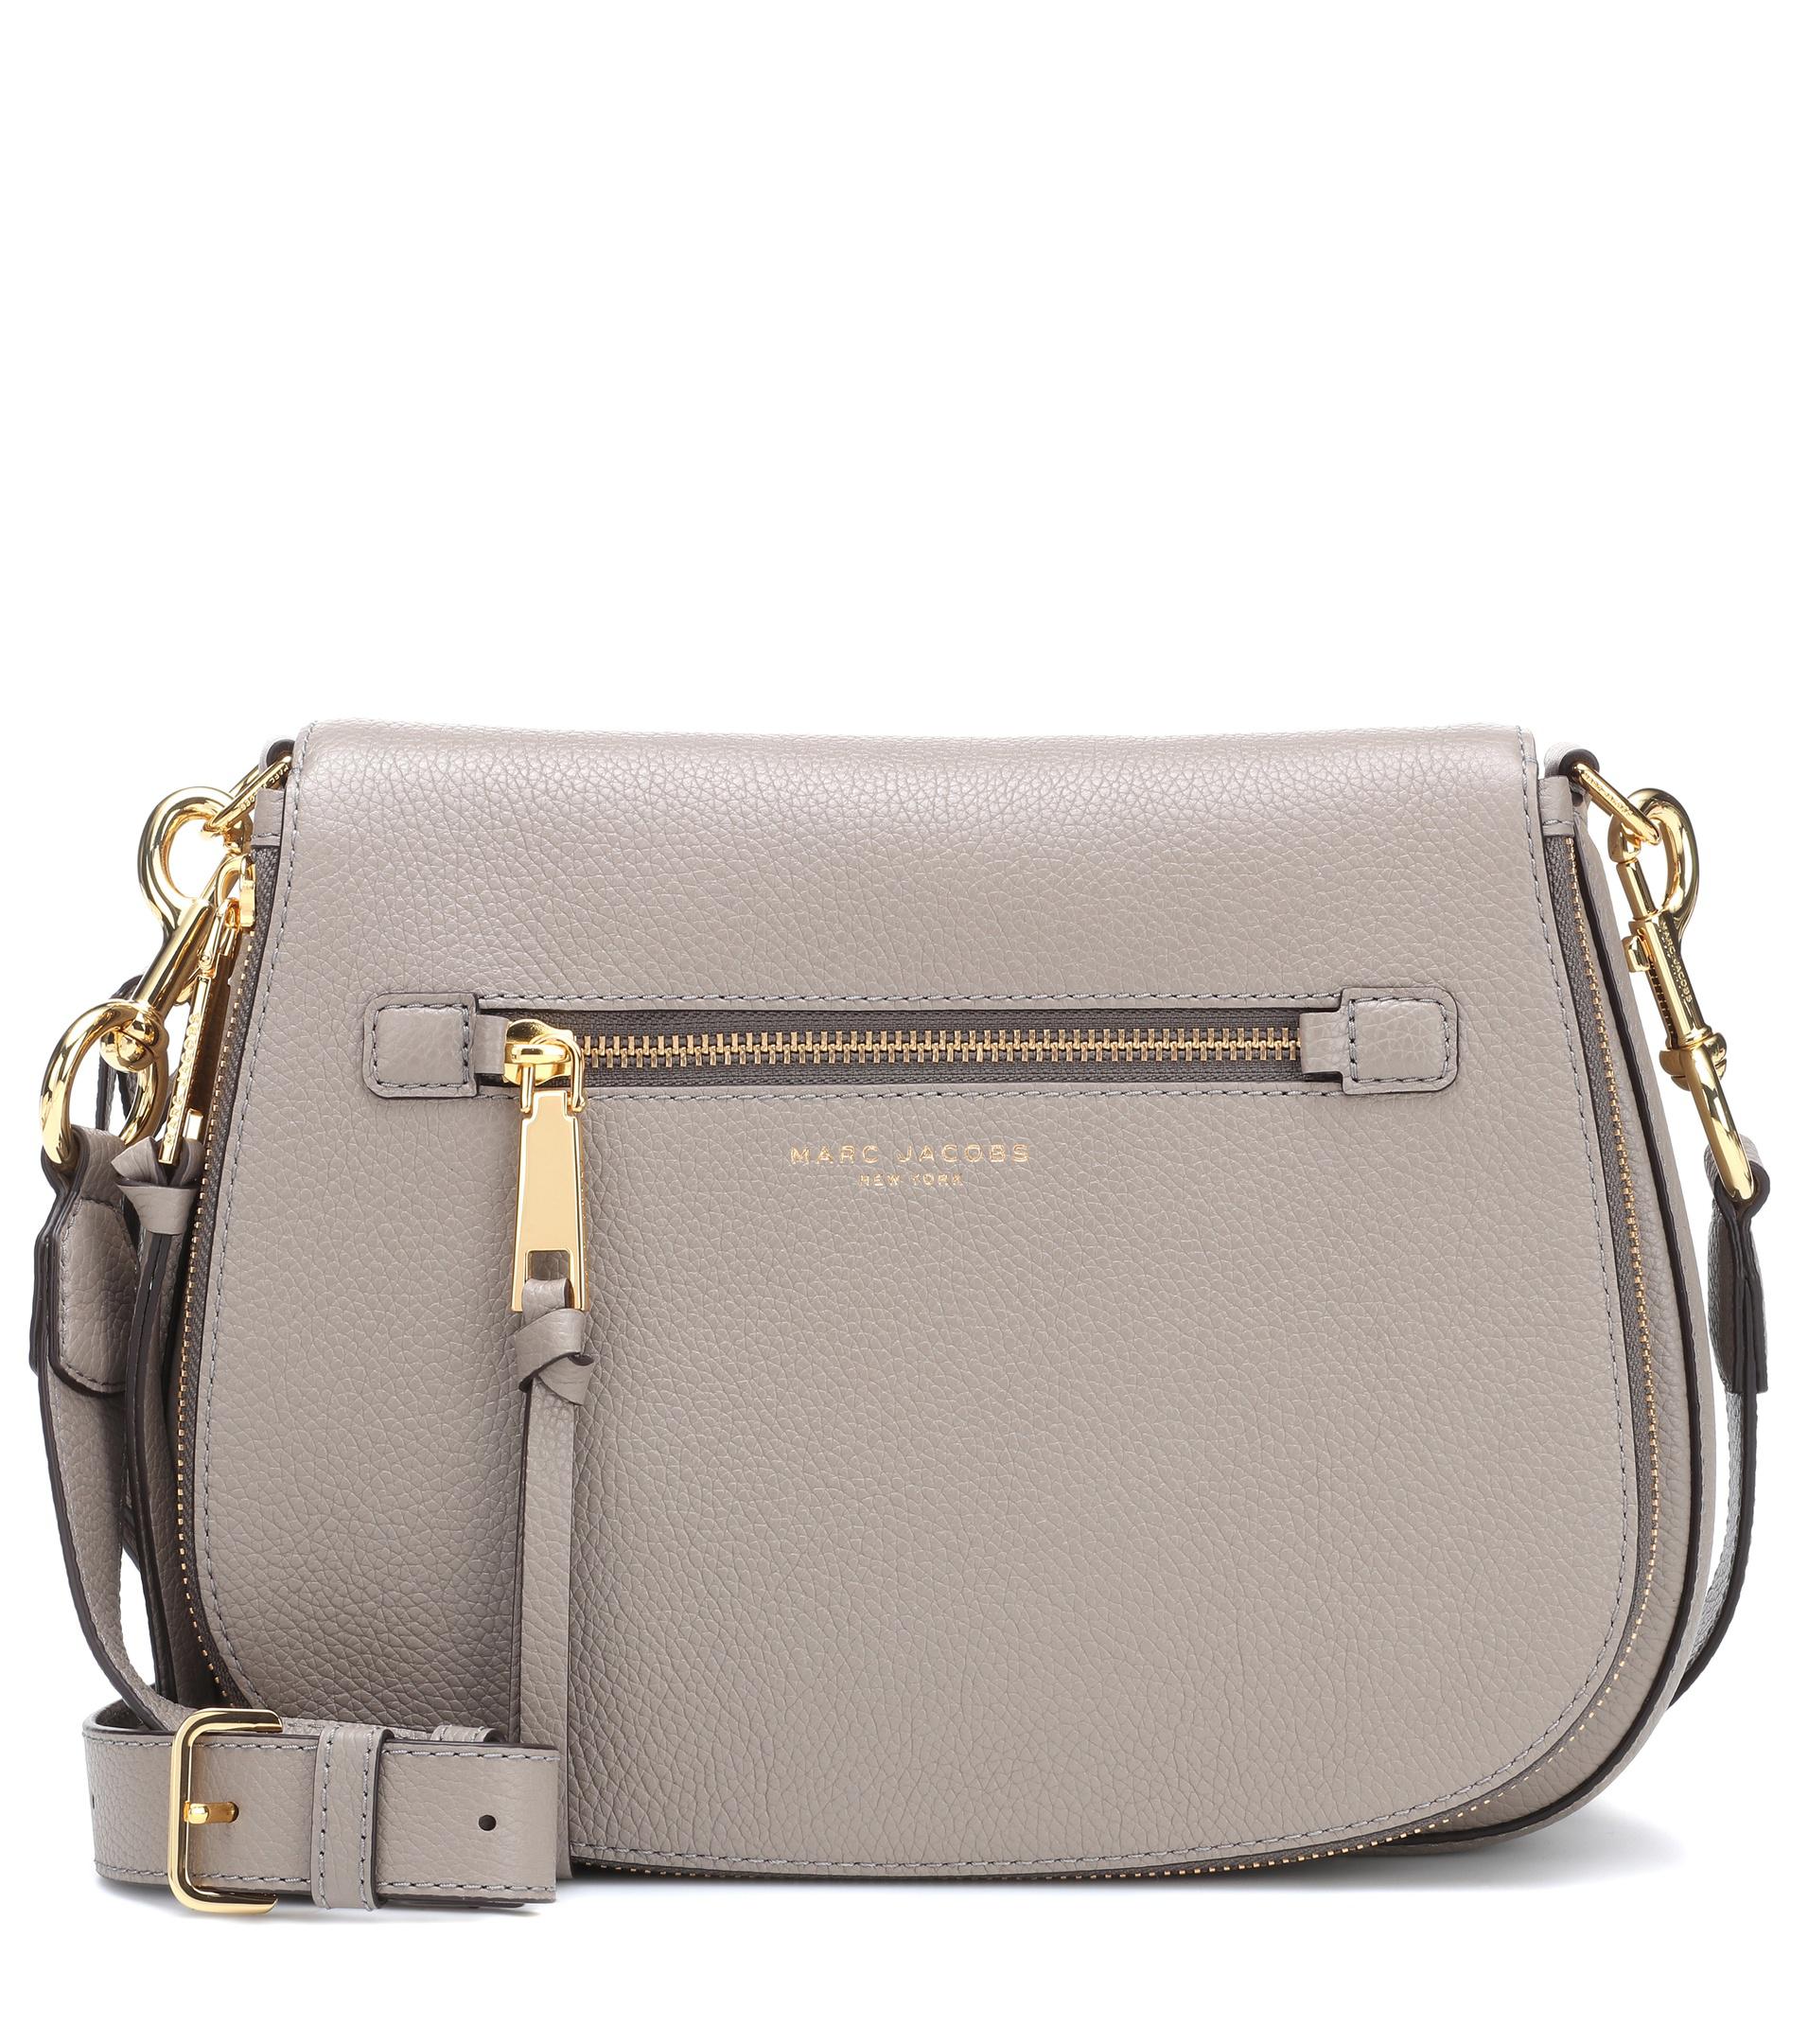 Marc Jacobs Recruit Nomad Leather Shoulder Bag in Grey (Gray) - Lyst